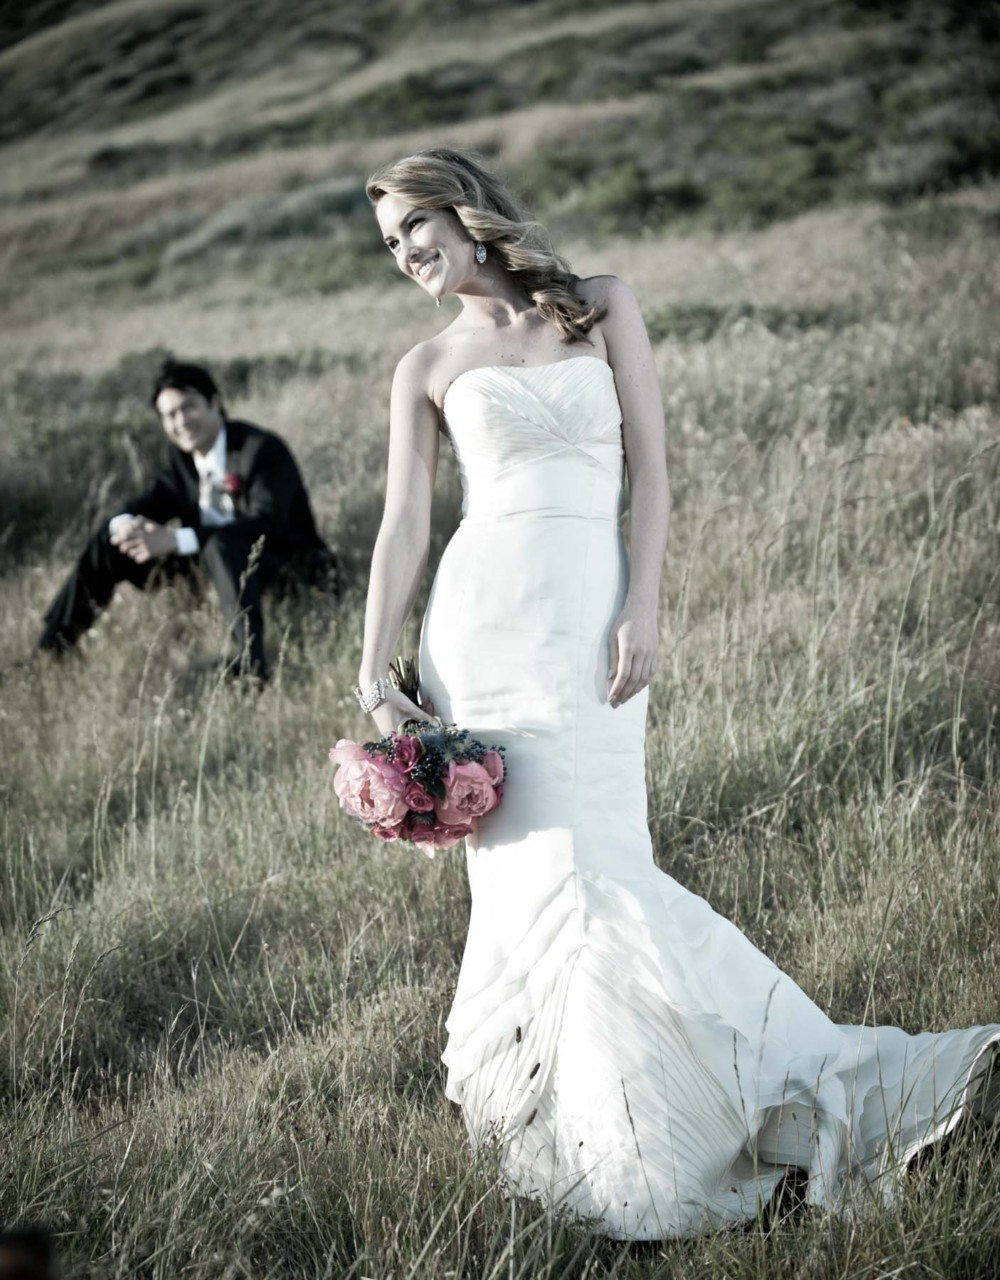 Looking for a event wedding photographer in Chugiak?